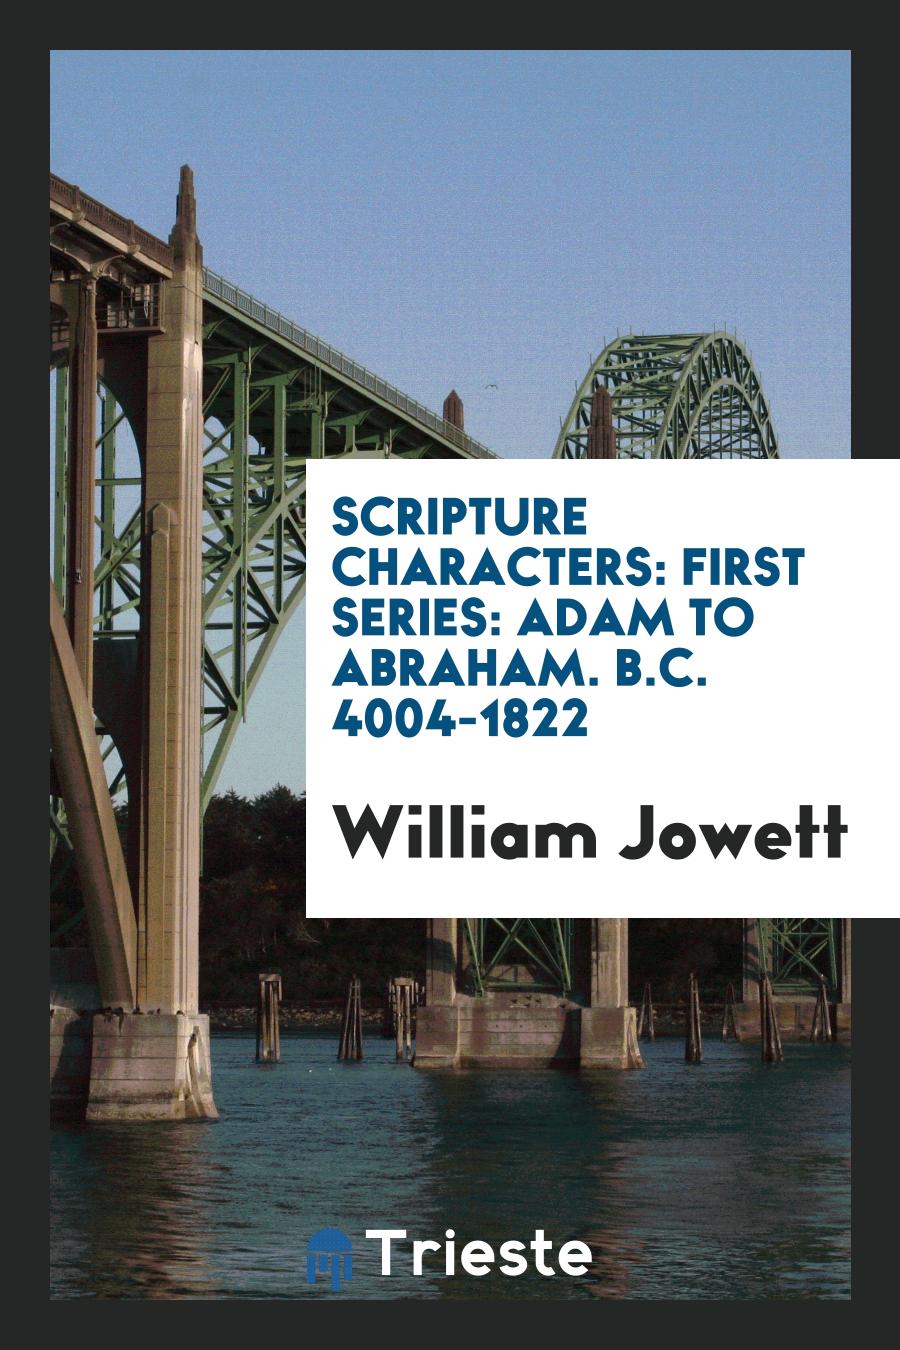 Scripture Characters: First Series: Adam to Abraham. B.C. 4004-1822